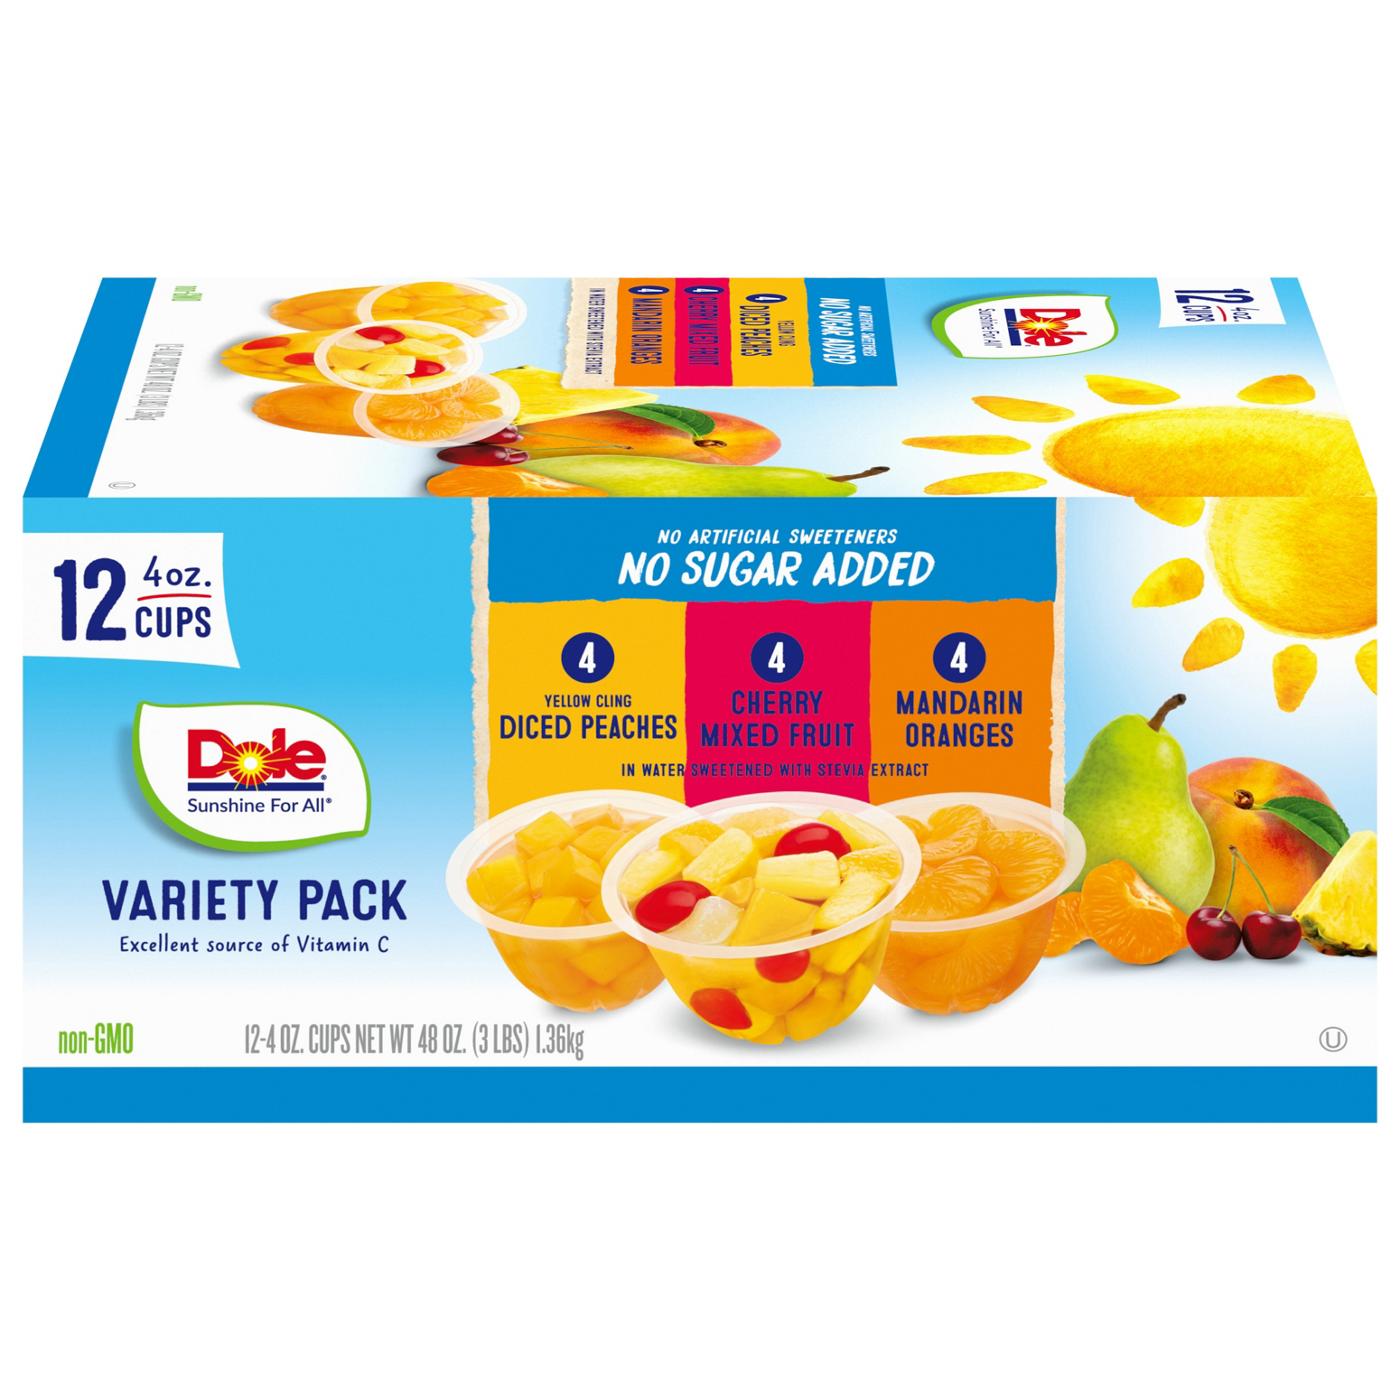 Dole Variety Pack - Peaches/ Cherry Mixed Fruit/Oranges; image 1 of 4